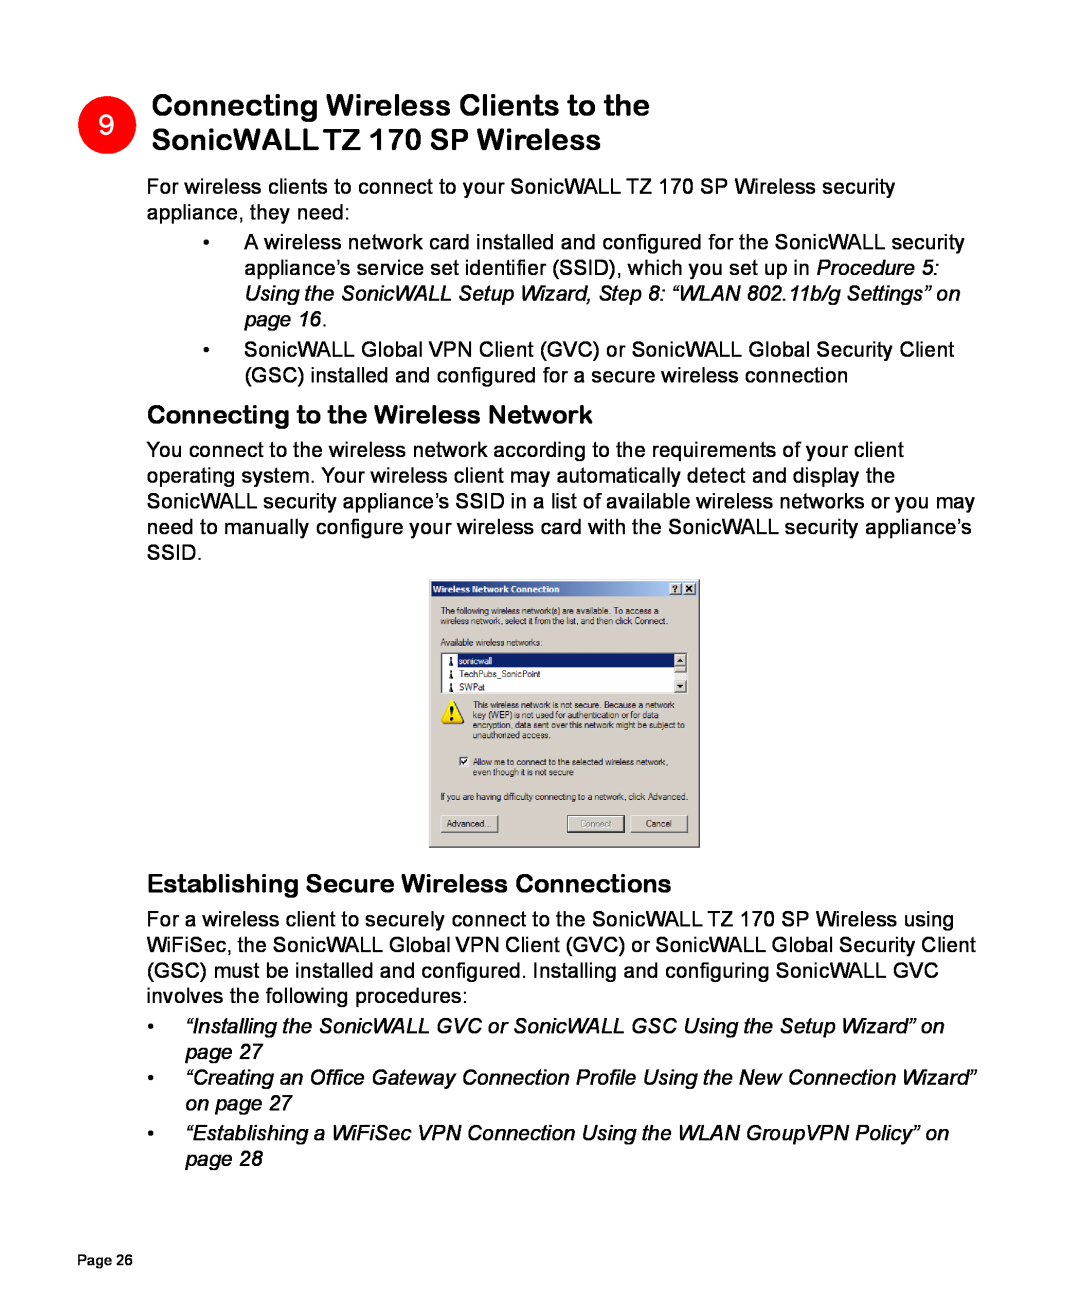 SonicWALL manual Connecting Wireless Clients to the, 9SonicWALL TZ 170 SP Wireless, Connecting to the Wireless Network 